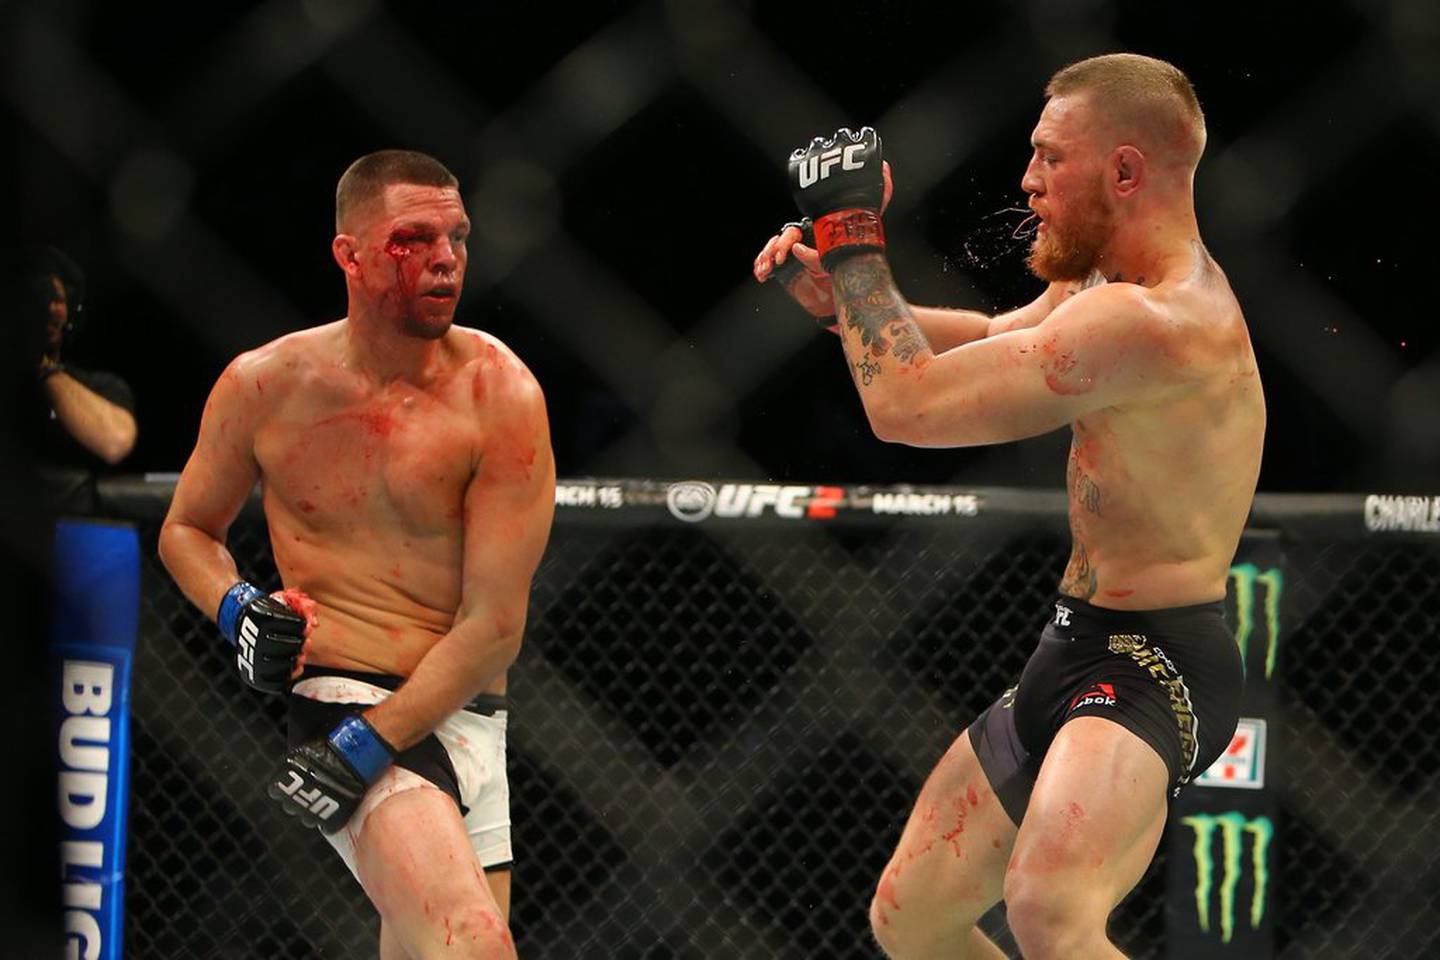 Nate Diaz has twice fought Conor McGregor, with the rivalry tied at 1-1. A trilogy bout could be on the cards but will depend on McGregor's recovery from a broken leg. 